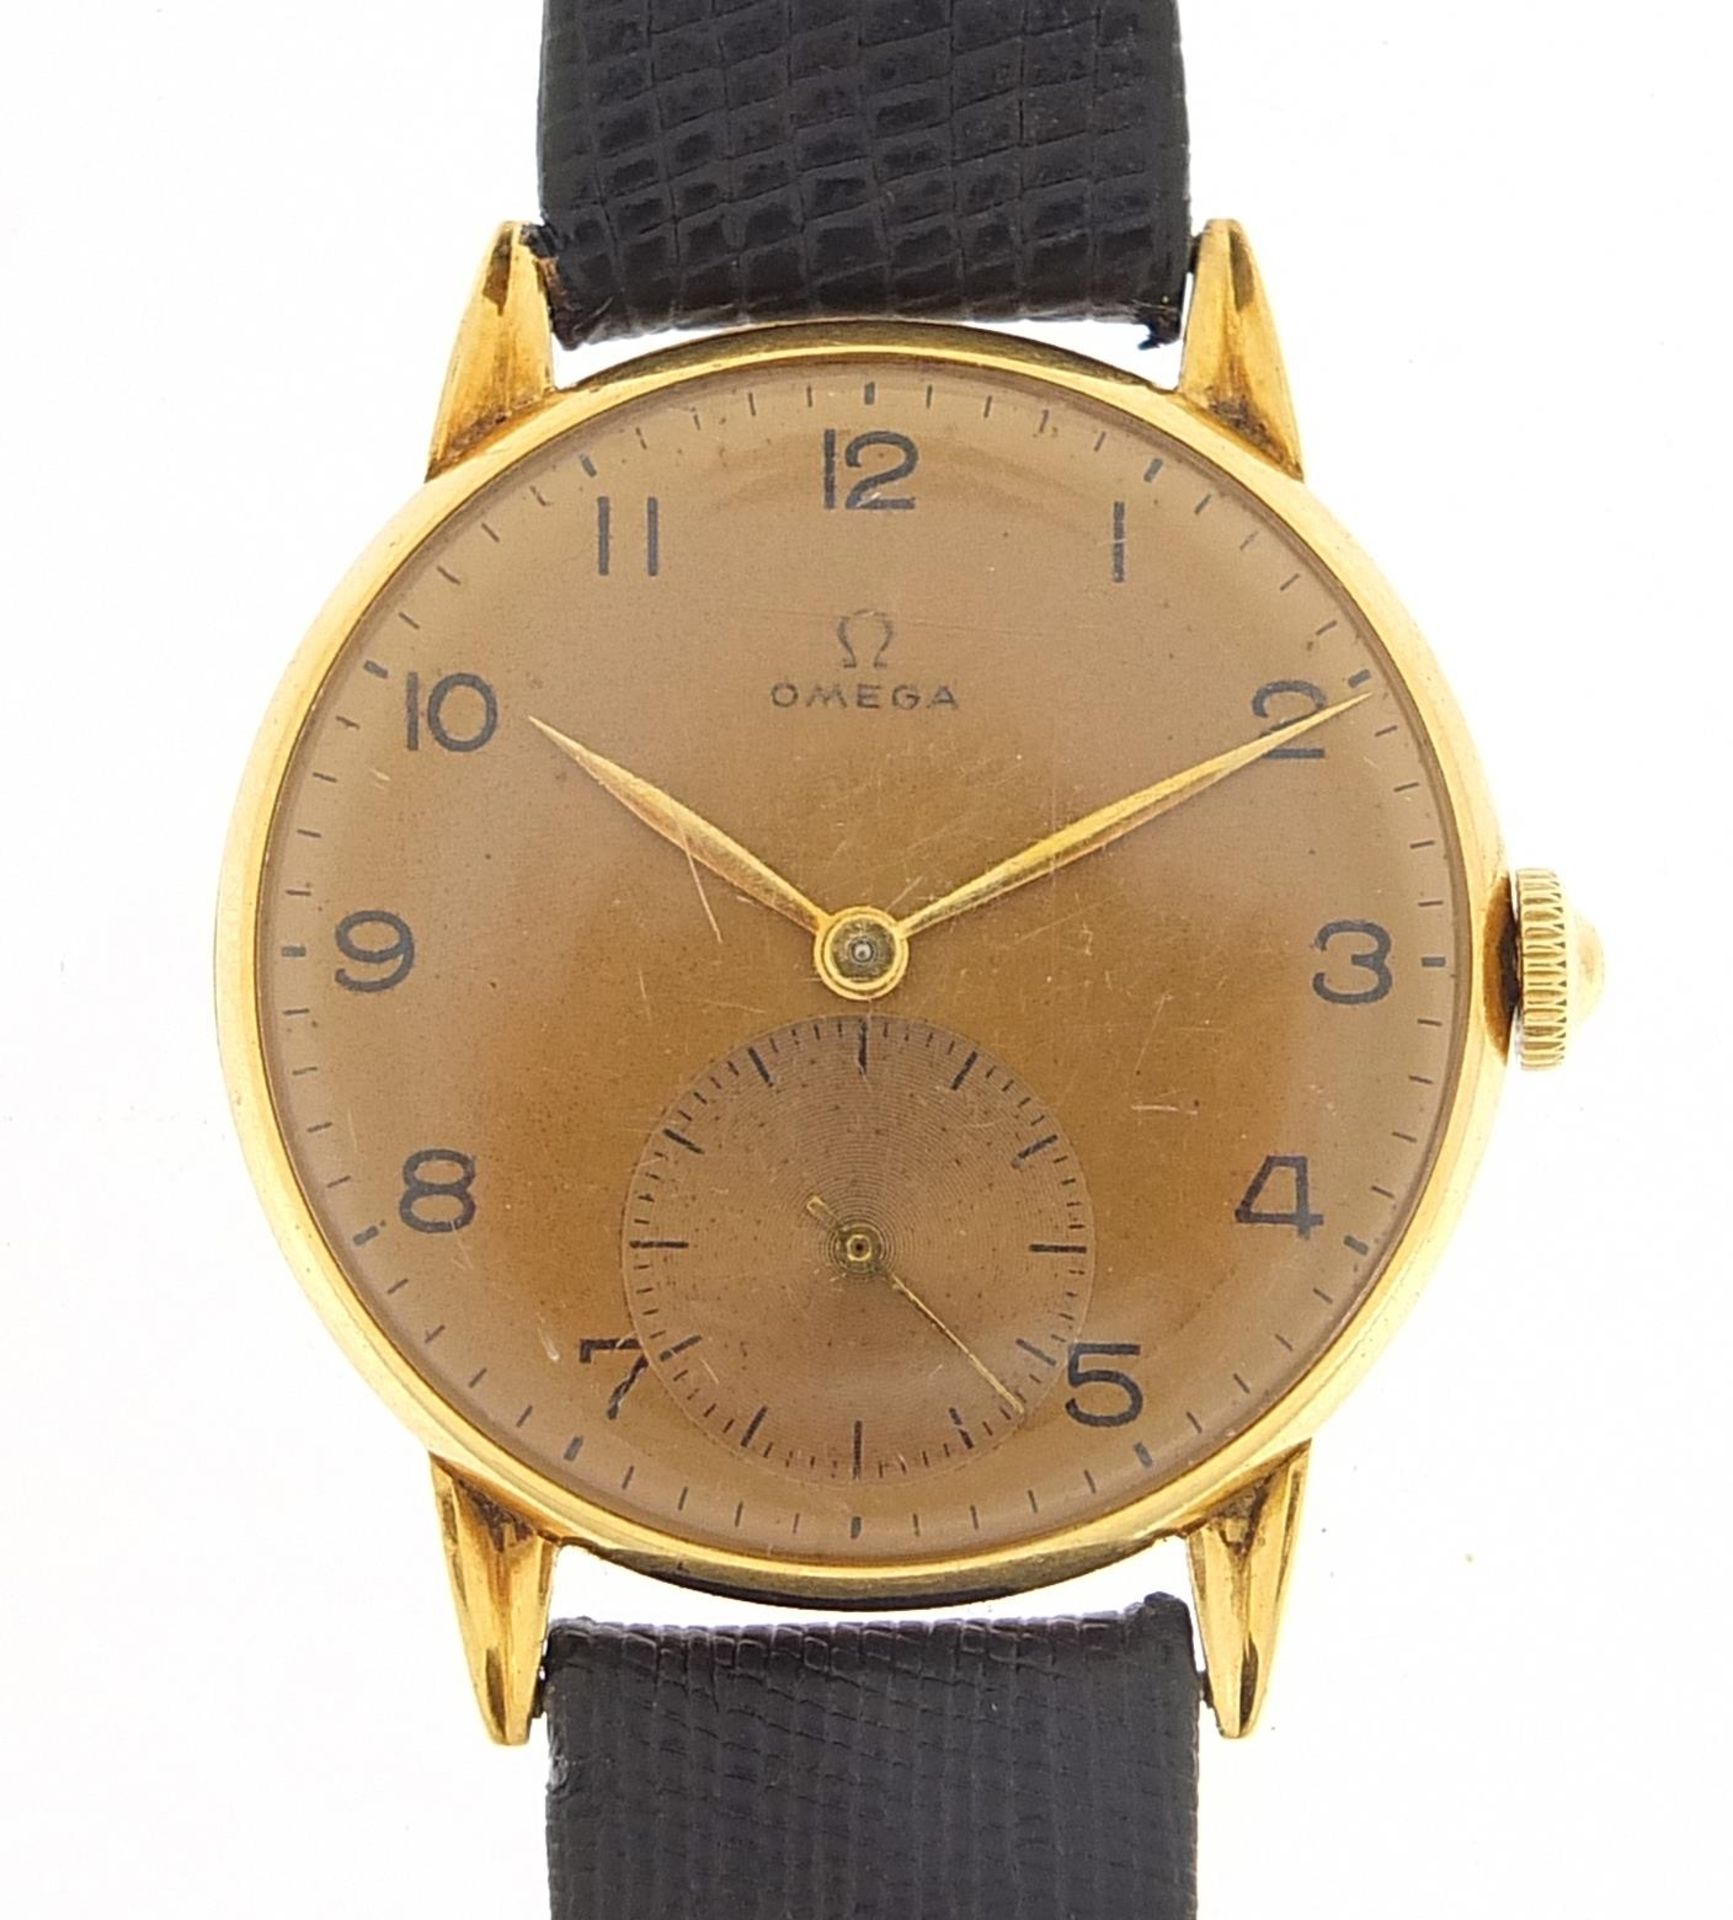 Omega, vintage gentlemen's 18ct gold manual wind wristwatch, the movement numbered 10648310, 34mm in